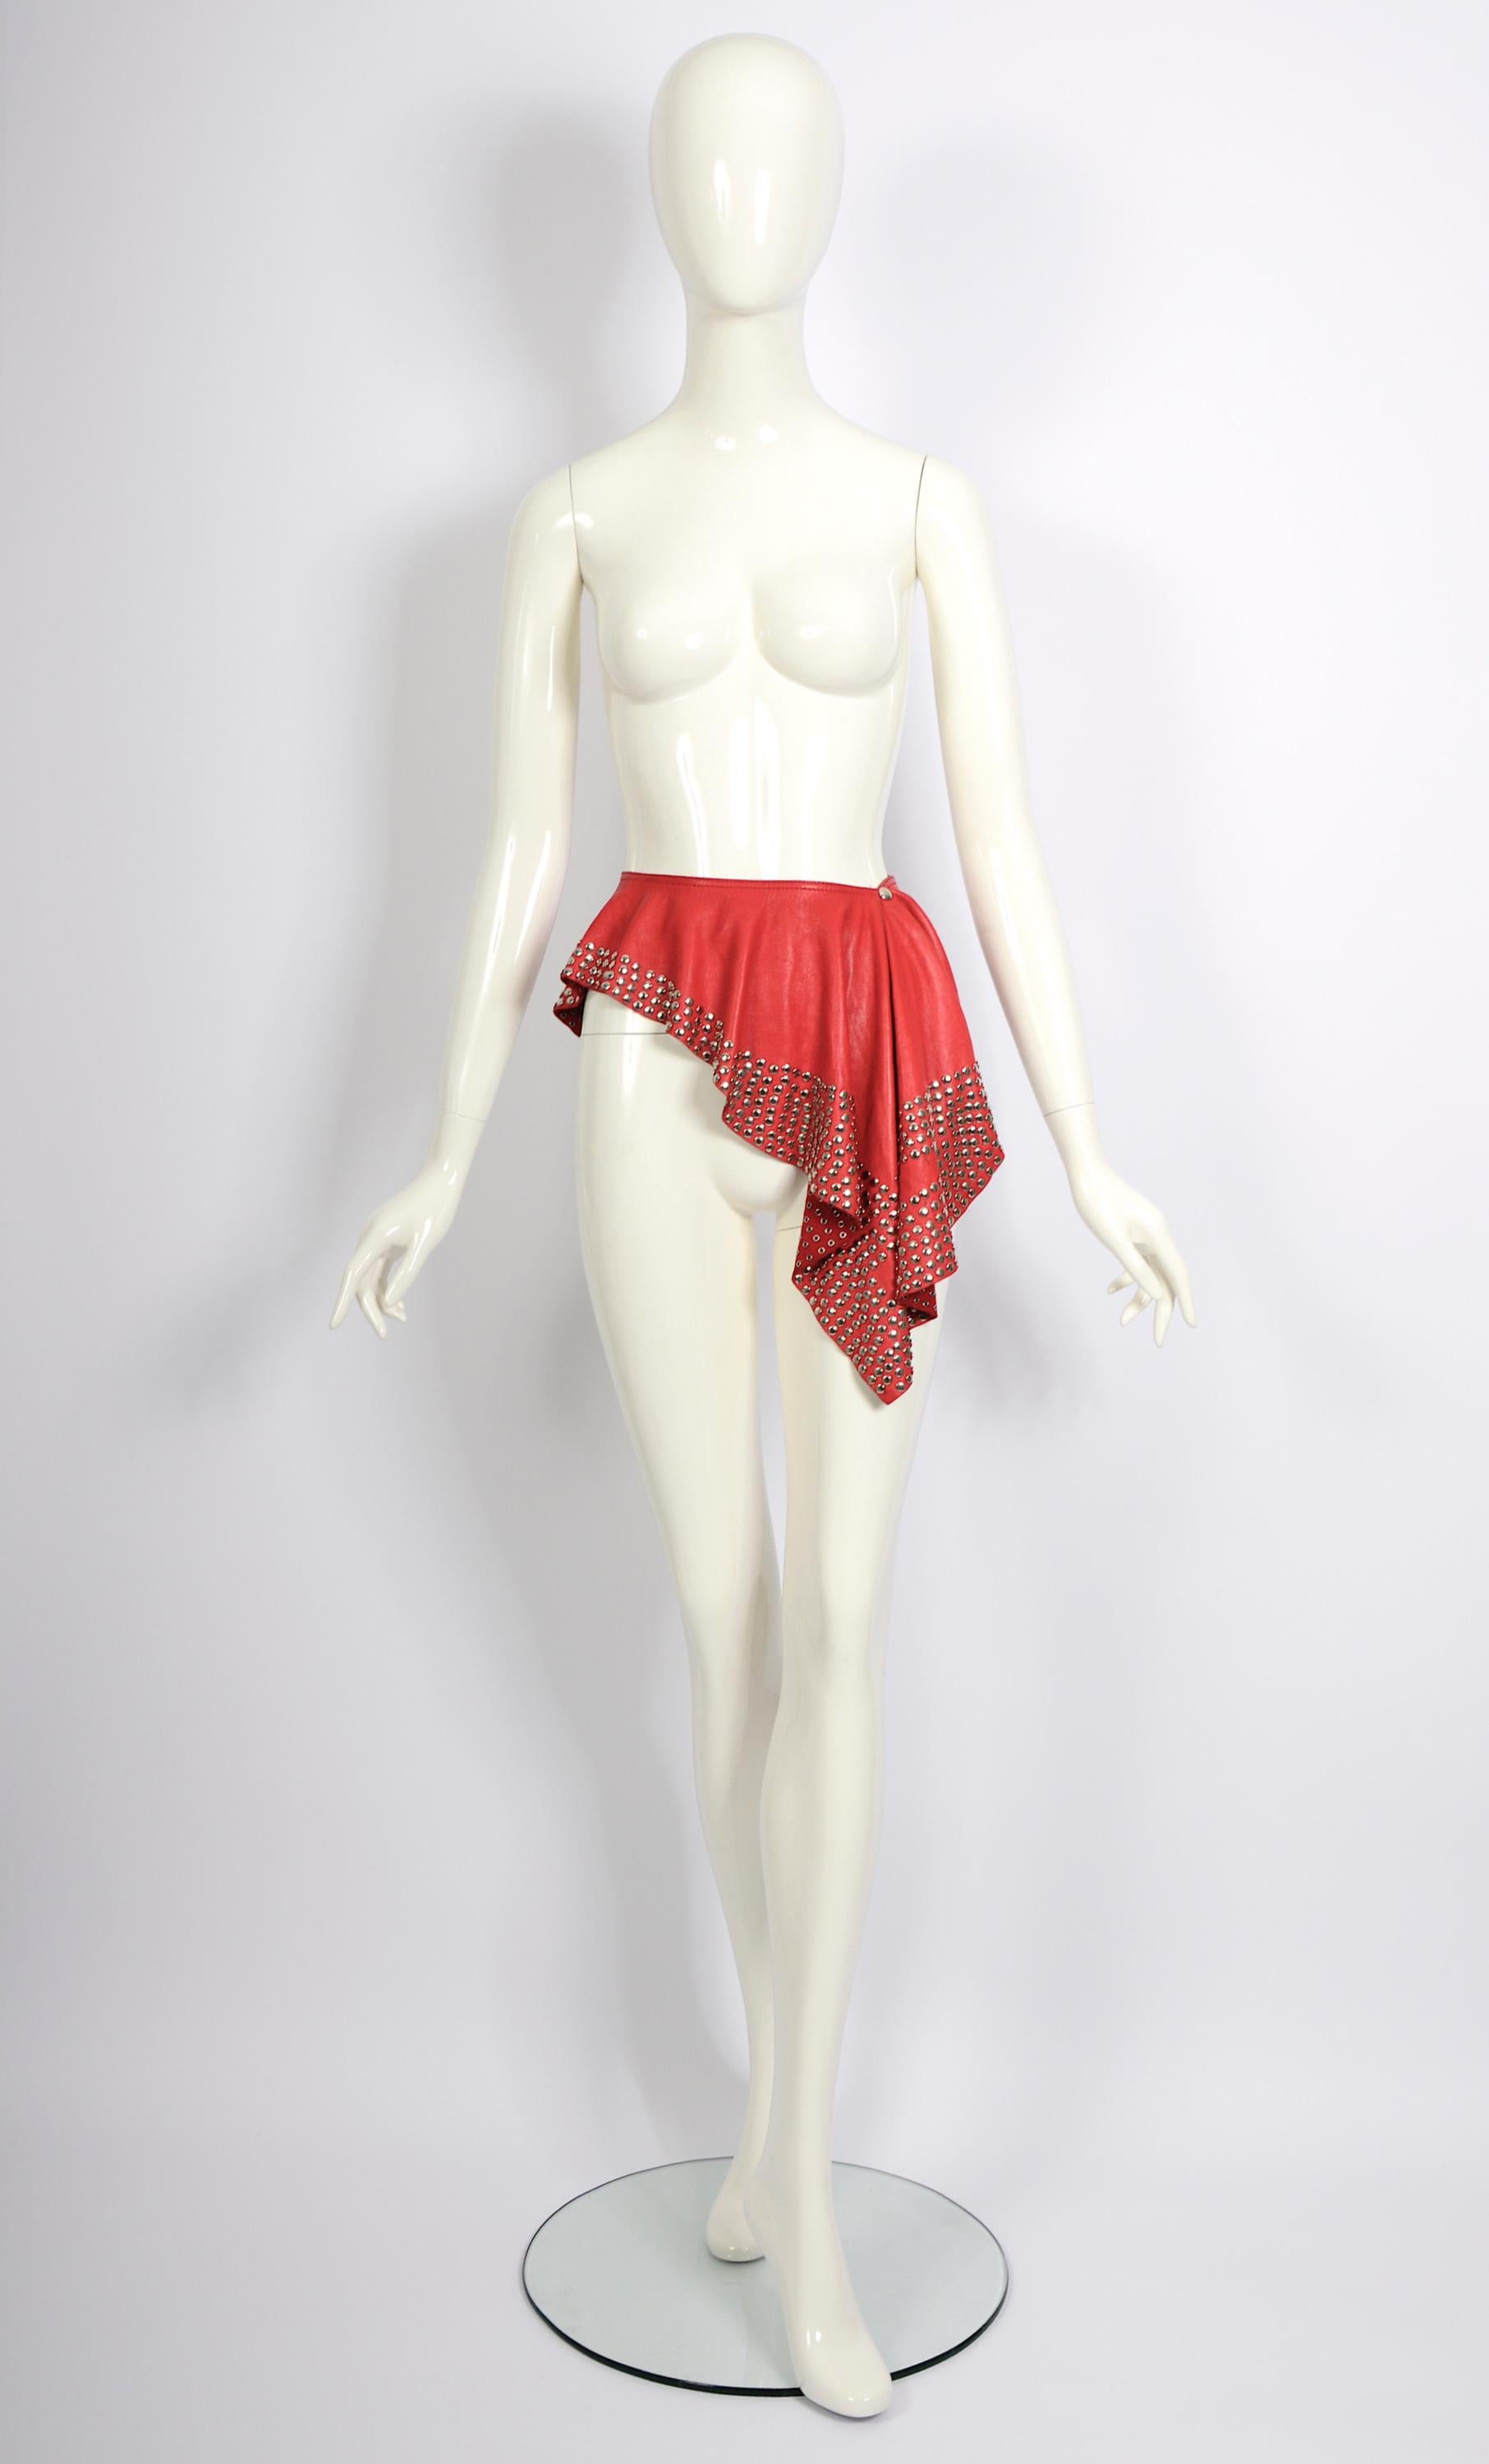 Azzedine Alaia circa 1981 collectionneurs Studded embellished red leather belt skirt en vente 8